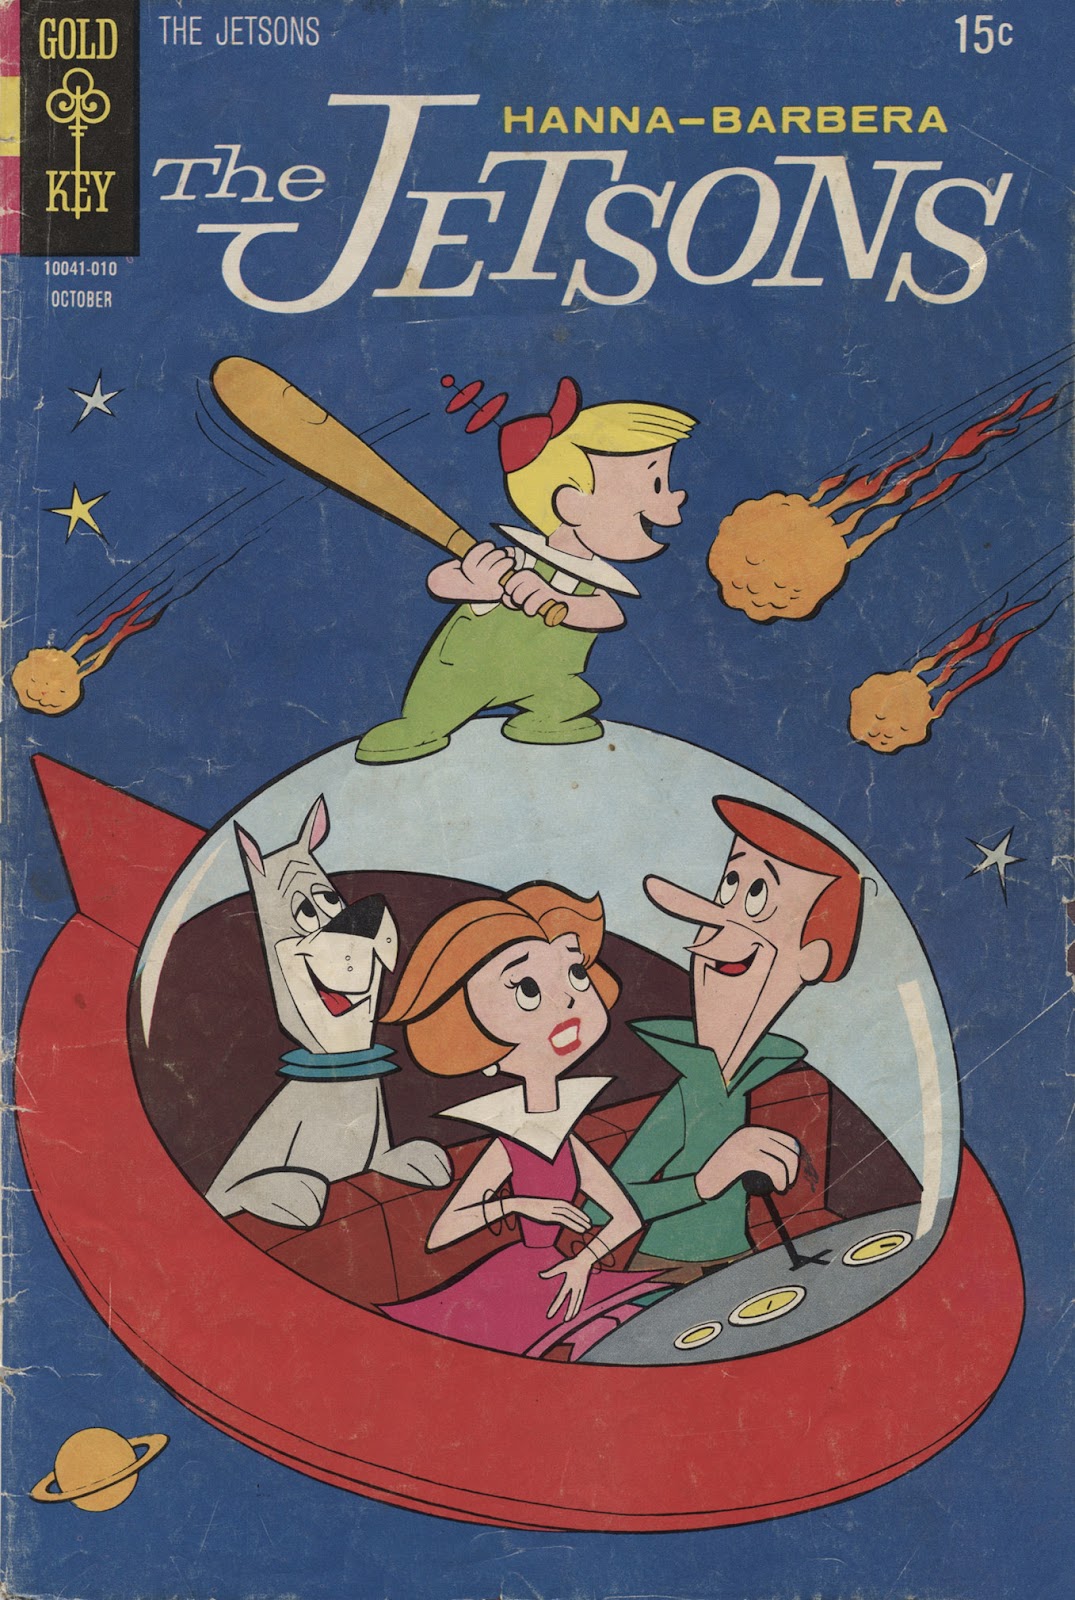 The Jetsons (1963) 36 Page 1